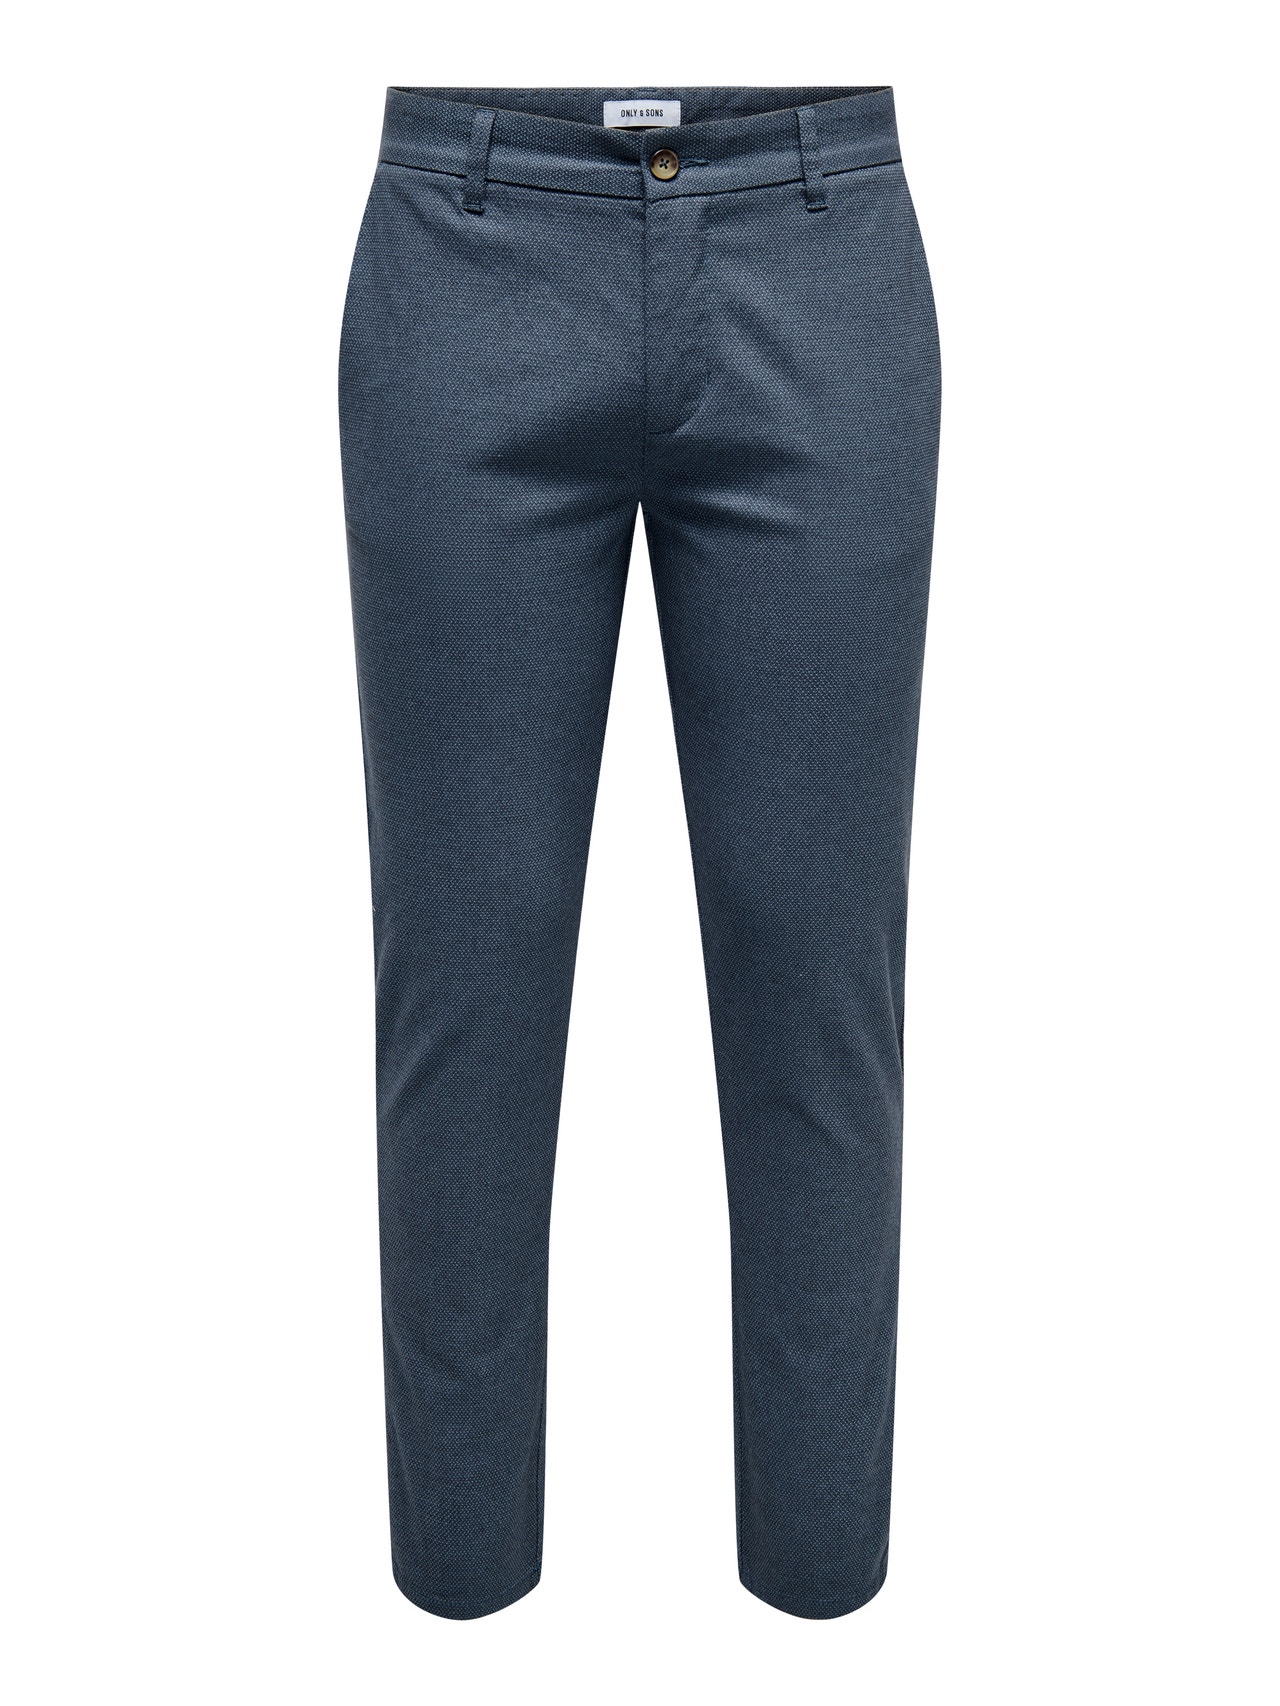 ONLY & SONS Slim fit chinos -Bering Sea - 22028132